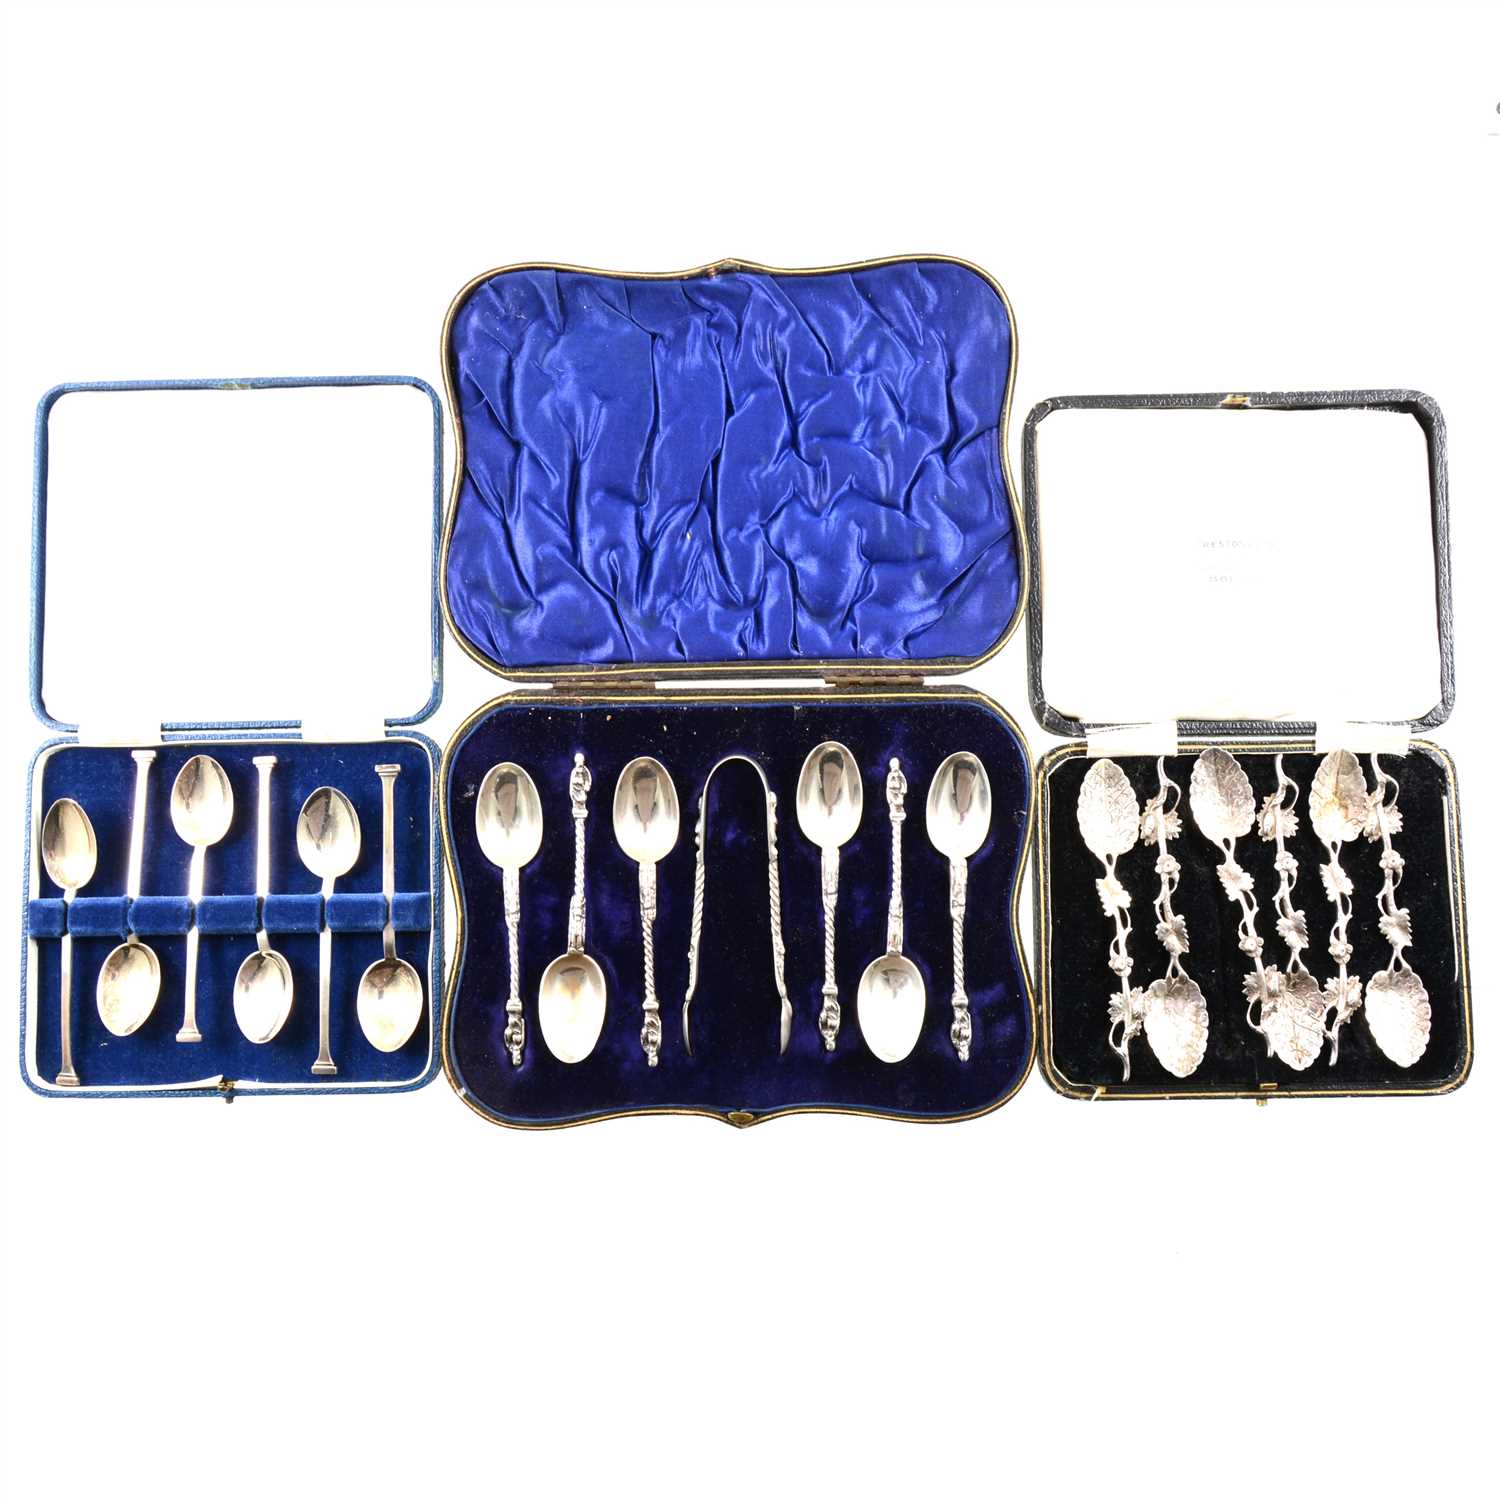 Lot 207 - A cased set of six silver teaspoons with apostle finials and a pair of sugar tongs by William Hutton & Sons Ltd, London 1902, a cased set of six silver coffee spoons with elaborate foliage design